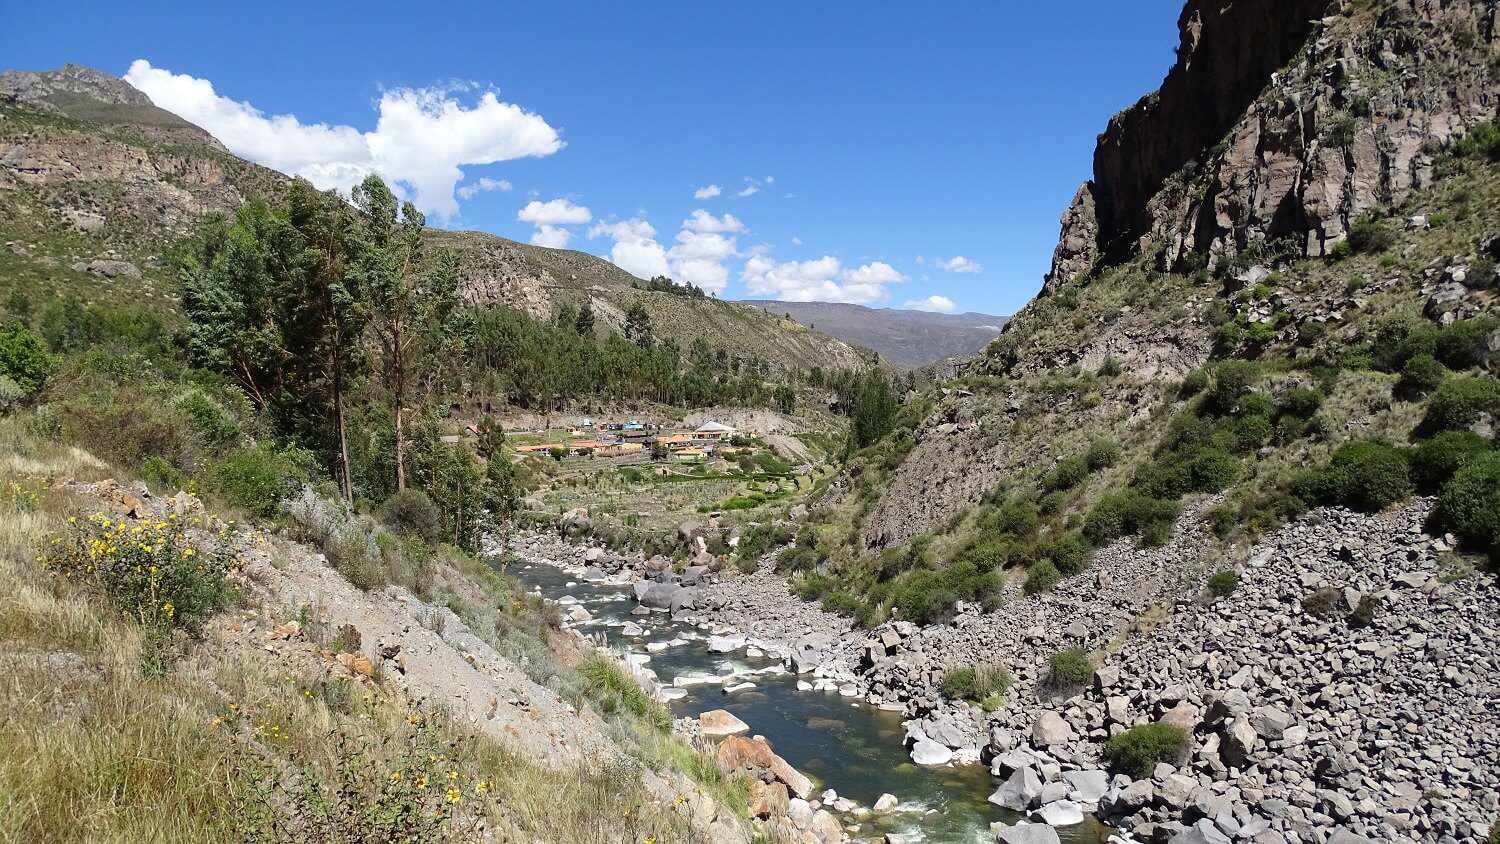 11Hiking the Collagua Route towards Chivay, Colca Canyon | RESPONSible Travel Peru